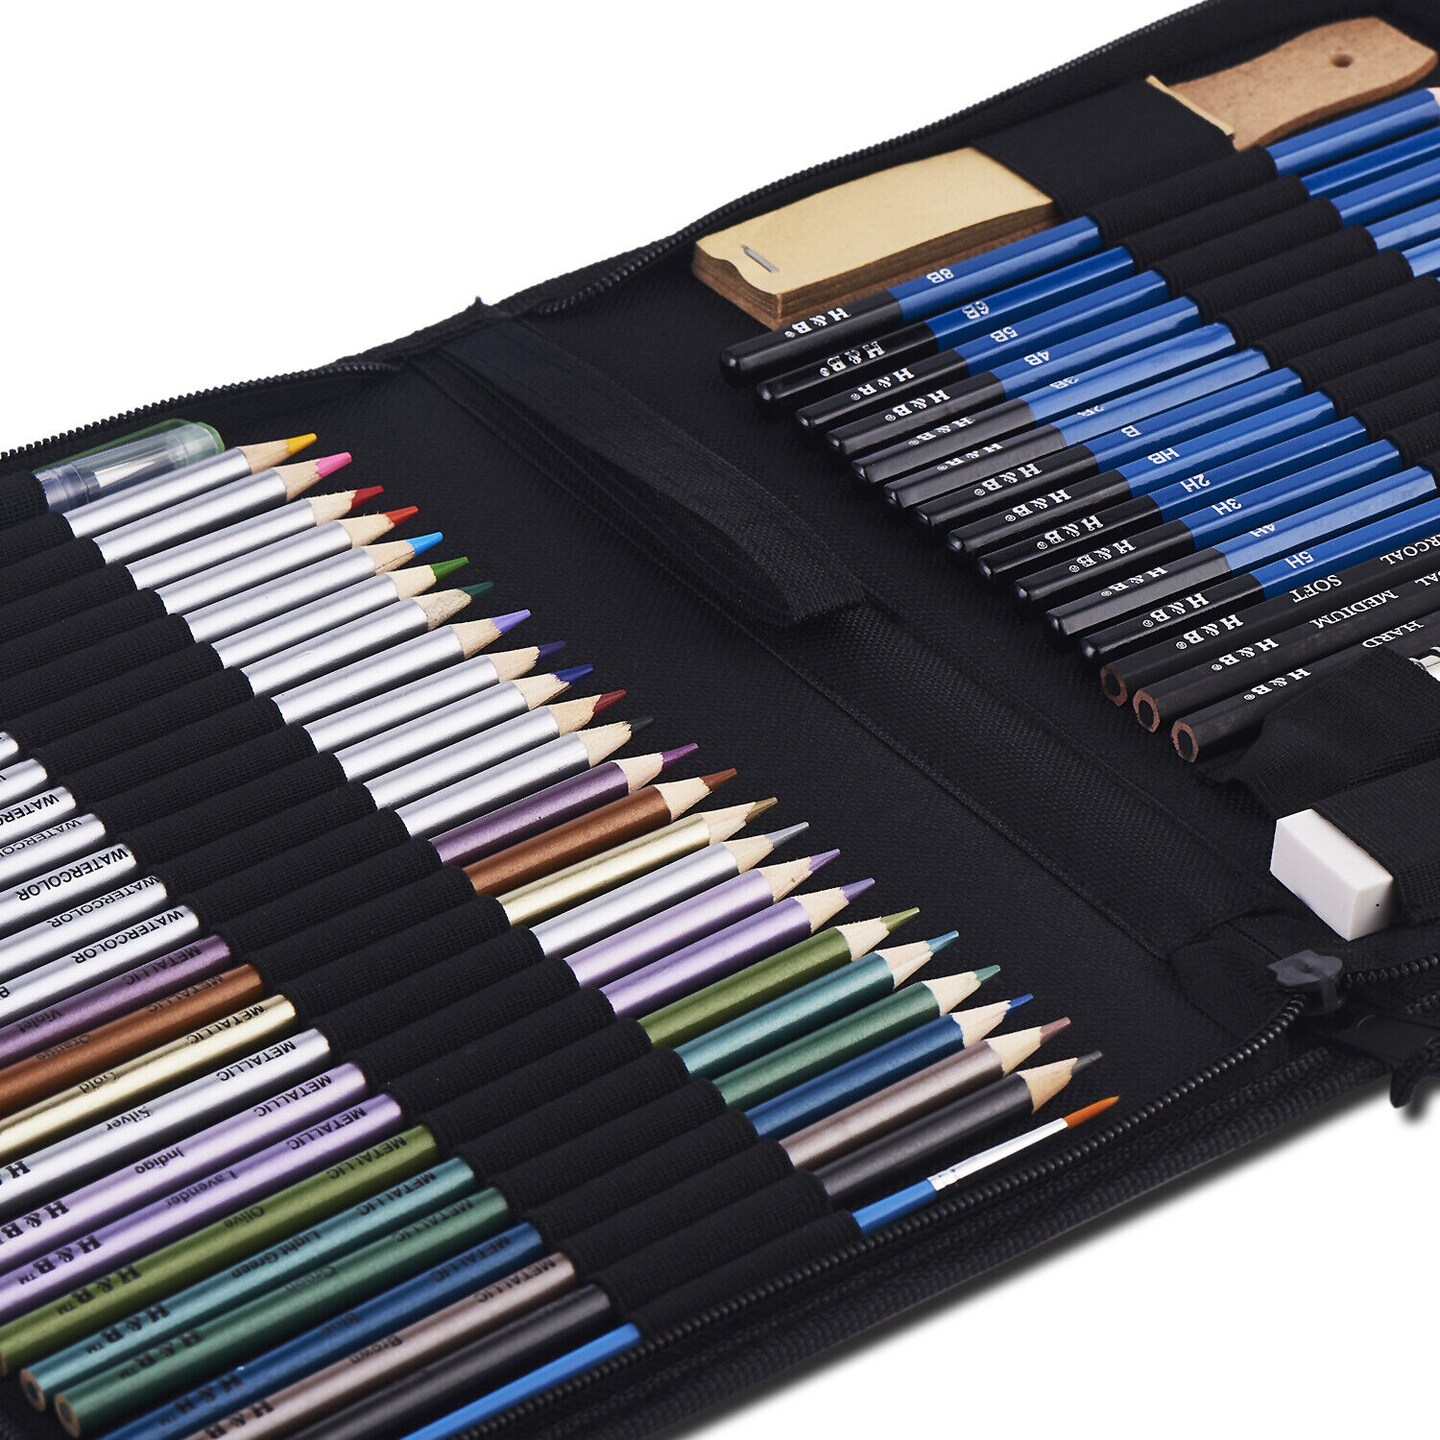 51-Piece Professional Drawing Set with Pencils, Sketch Charcoal, and Art Bag